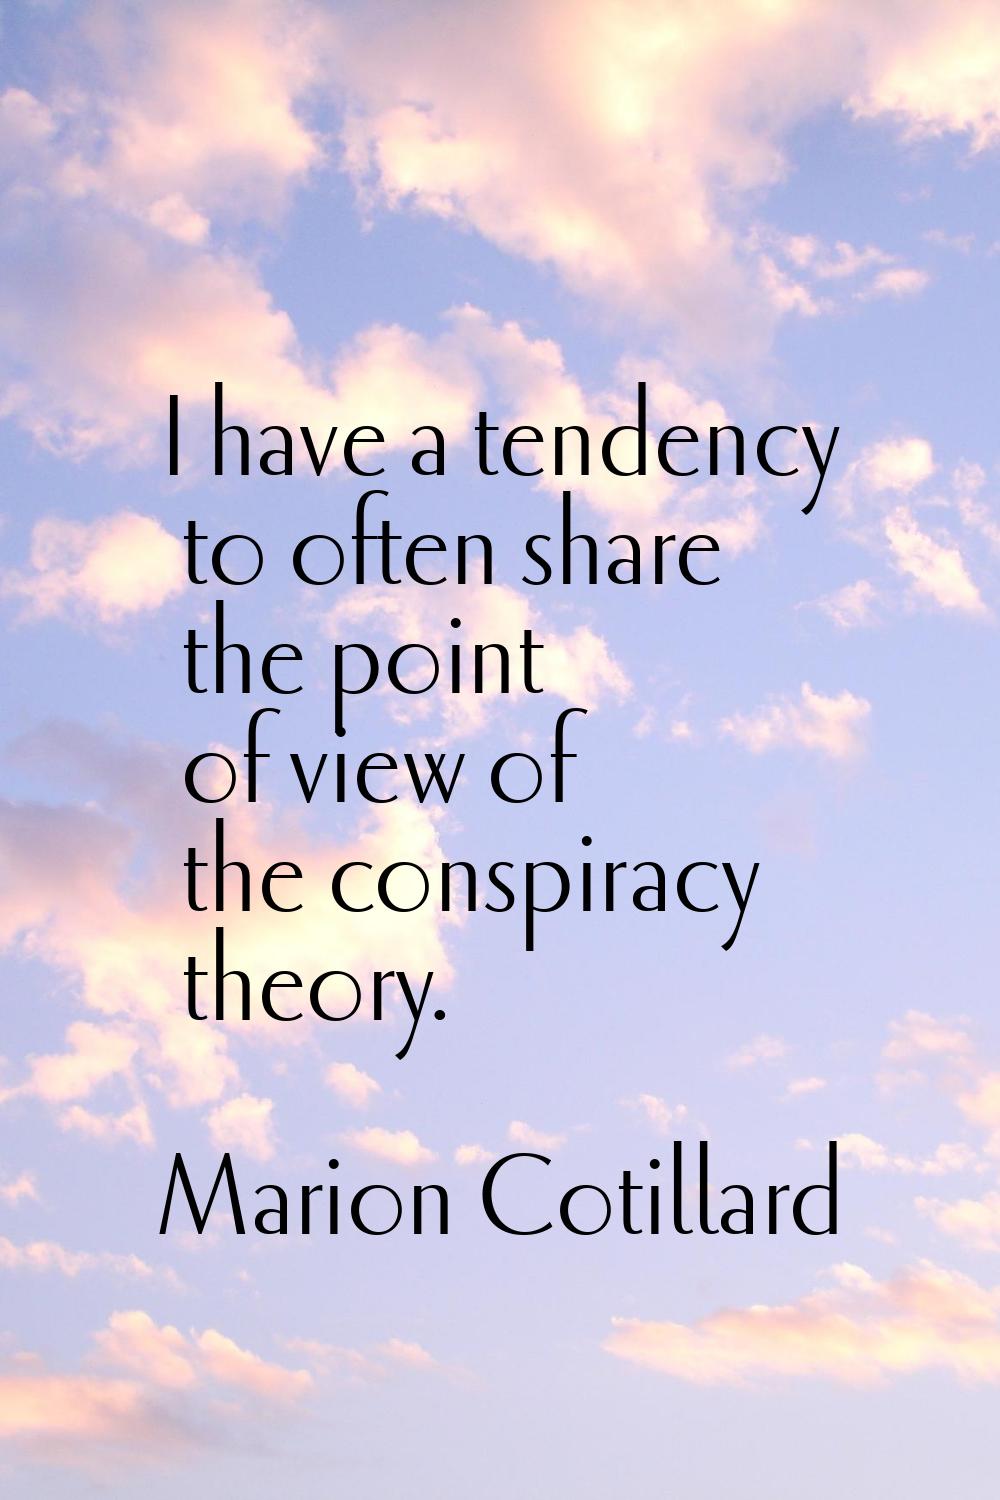 I have a tendency to often share the point of view of the conspiracy theory.